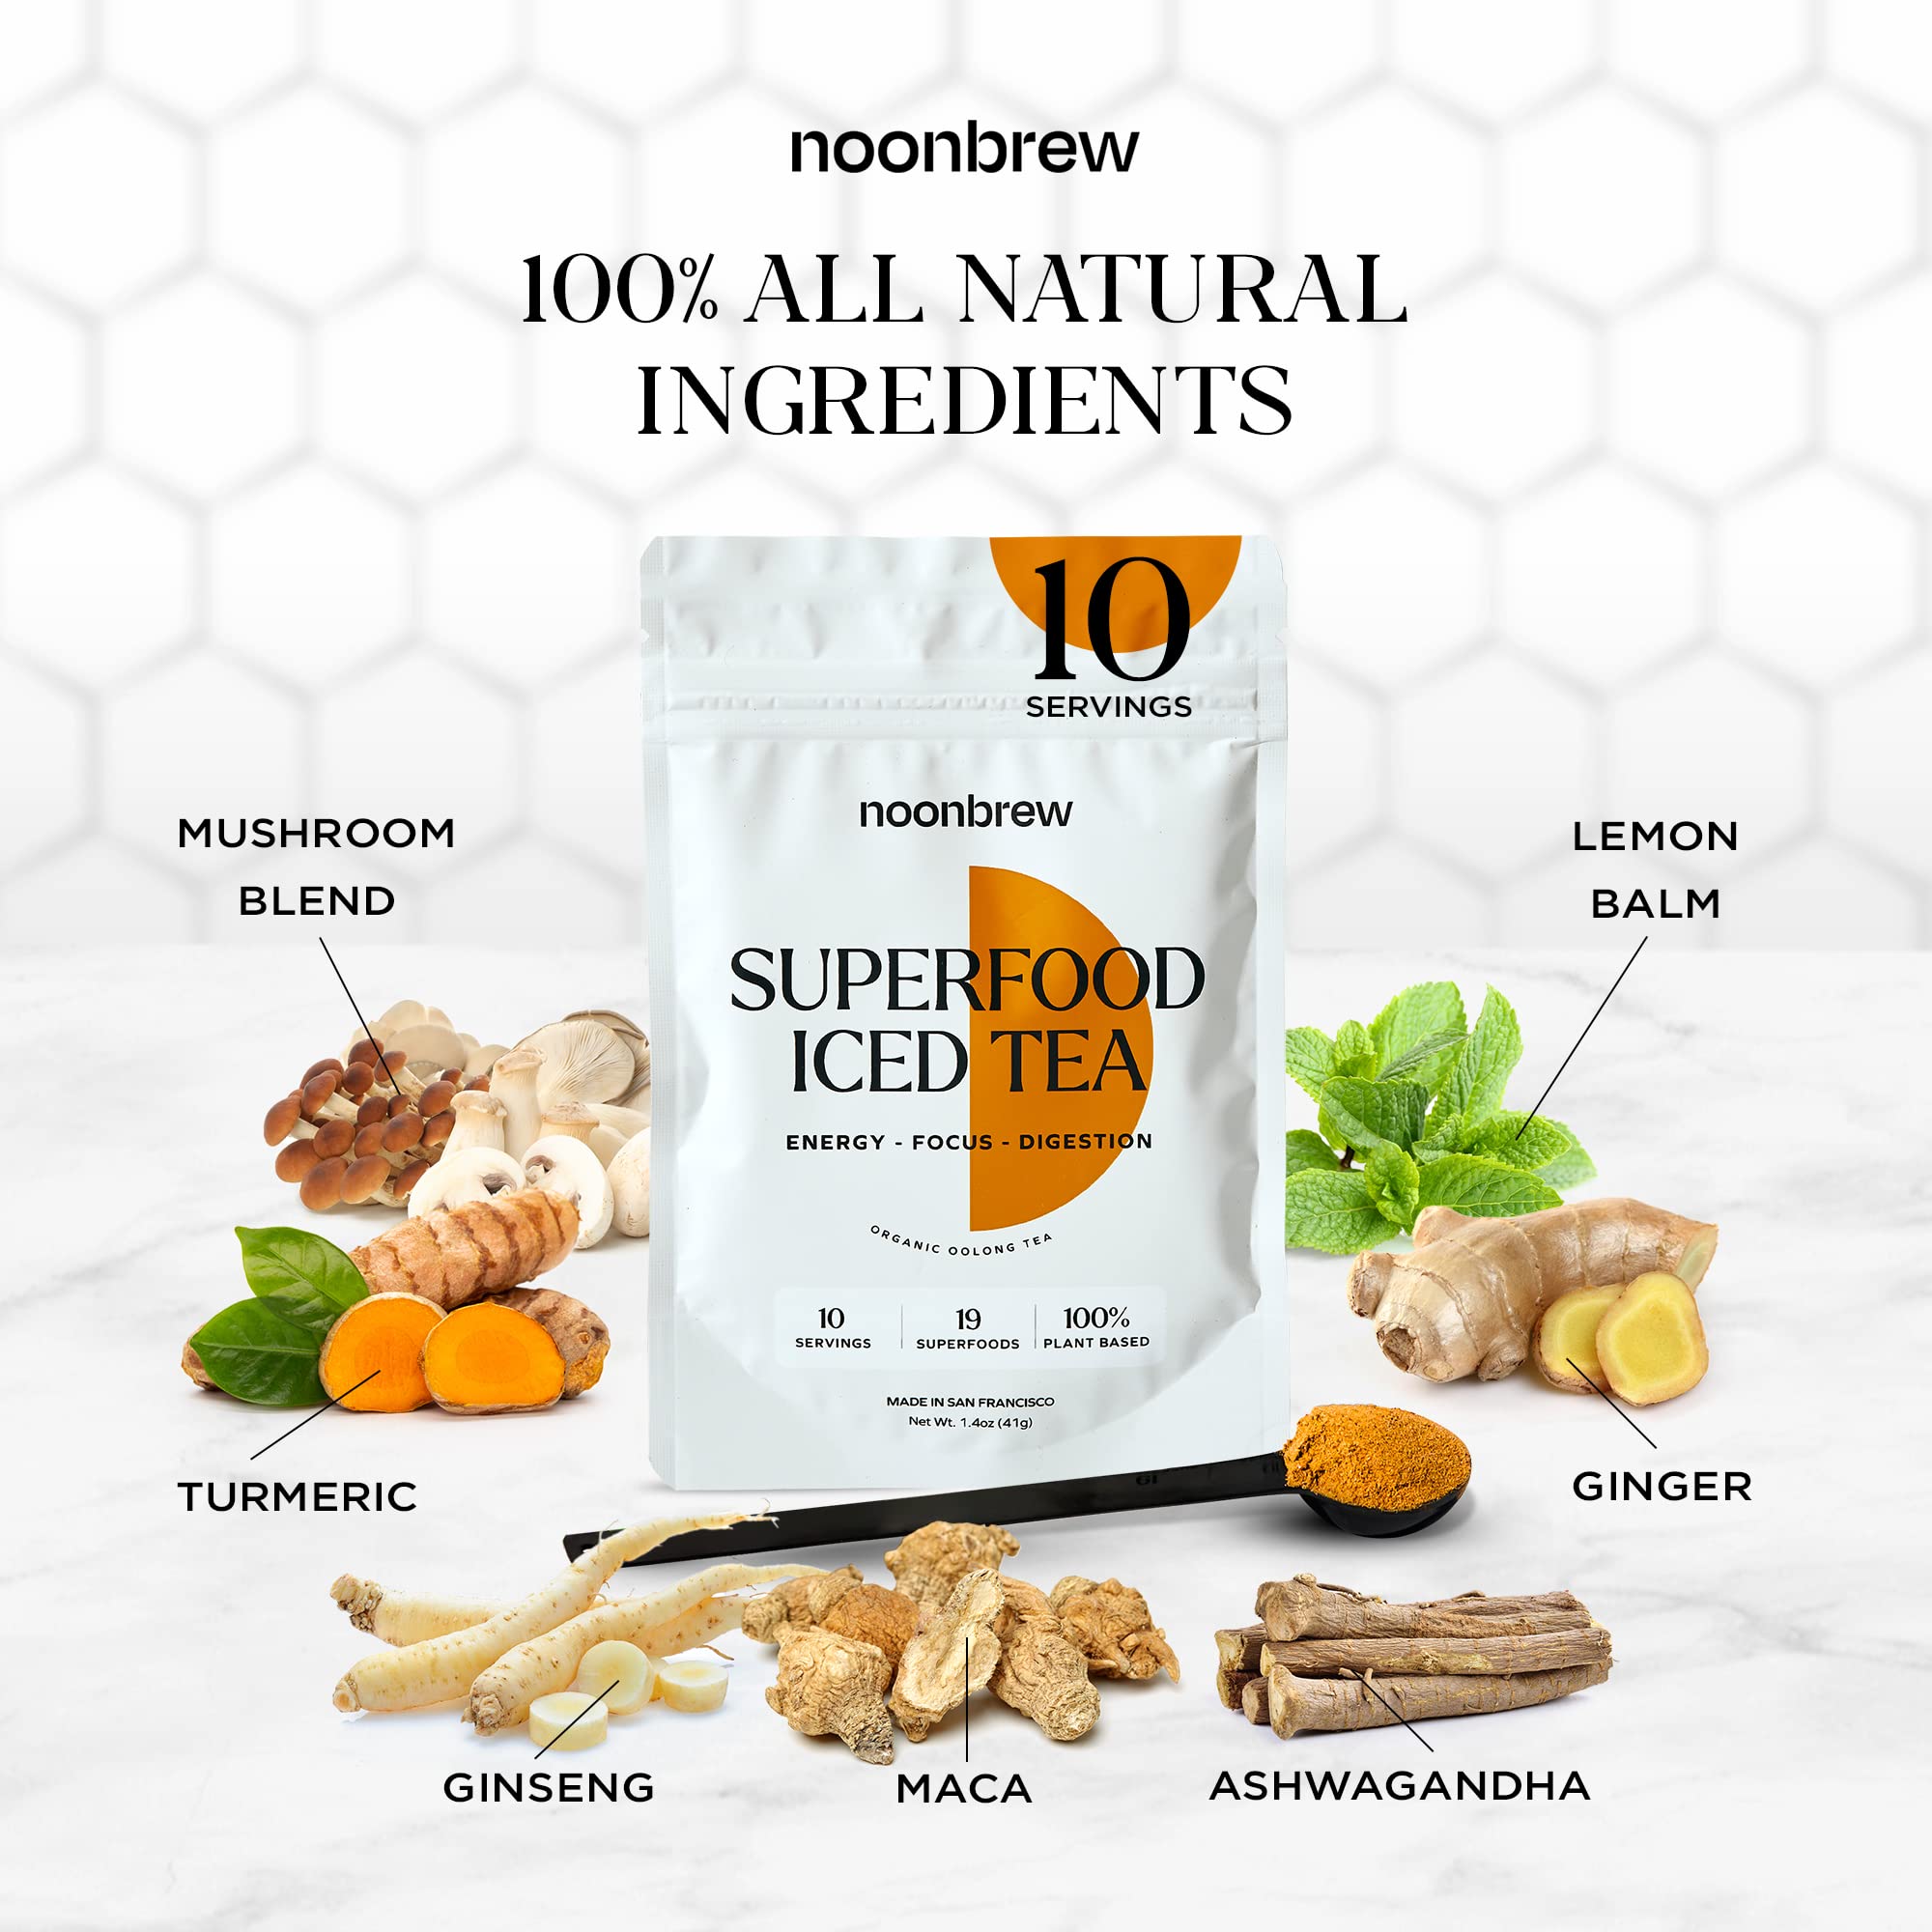 NoonBrew SuperFood Iced Tea - 19 SuperFoods and Adaptogens for All Day Focus, Energy, Digestion Support, Stress Relief, and No Jitters or Crash - Instant Coffee Substitute, Vegan, Keto Friendly, Gluten Free, Low Caffeine (10 Servings - #1 SuperFood Organi